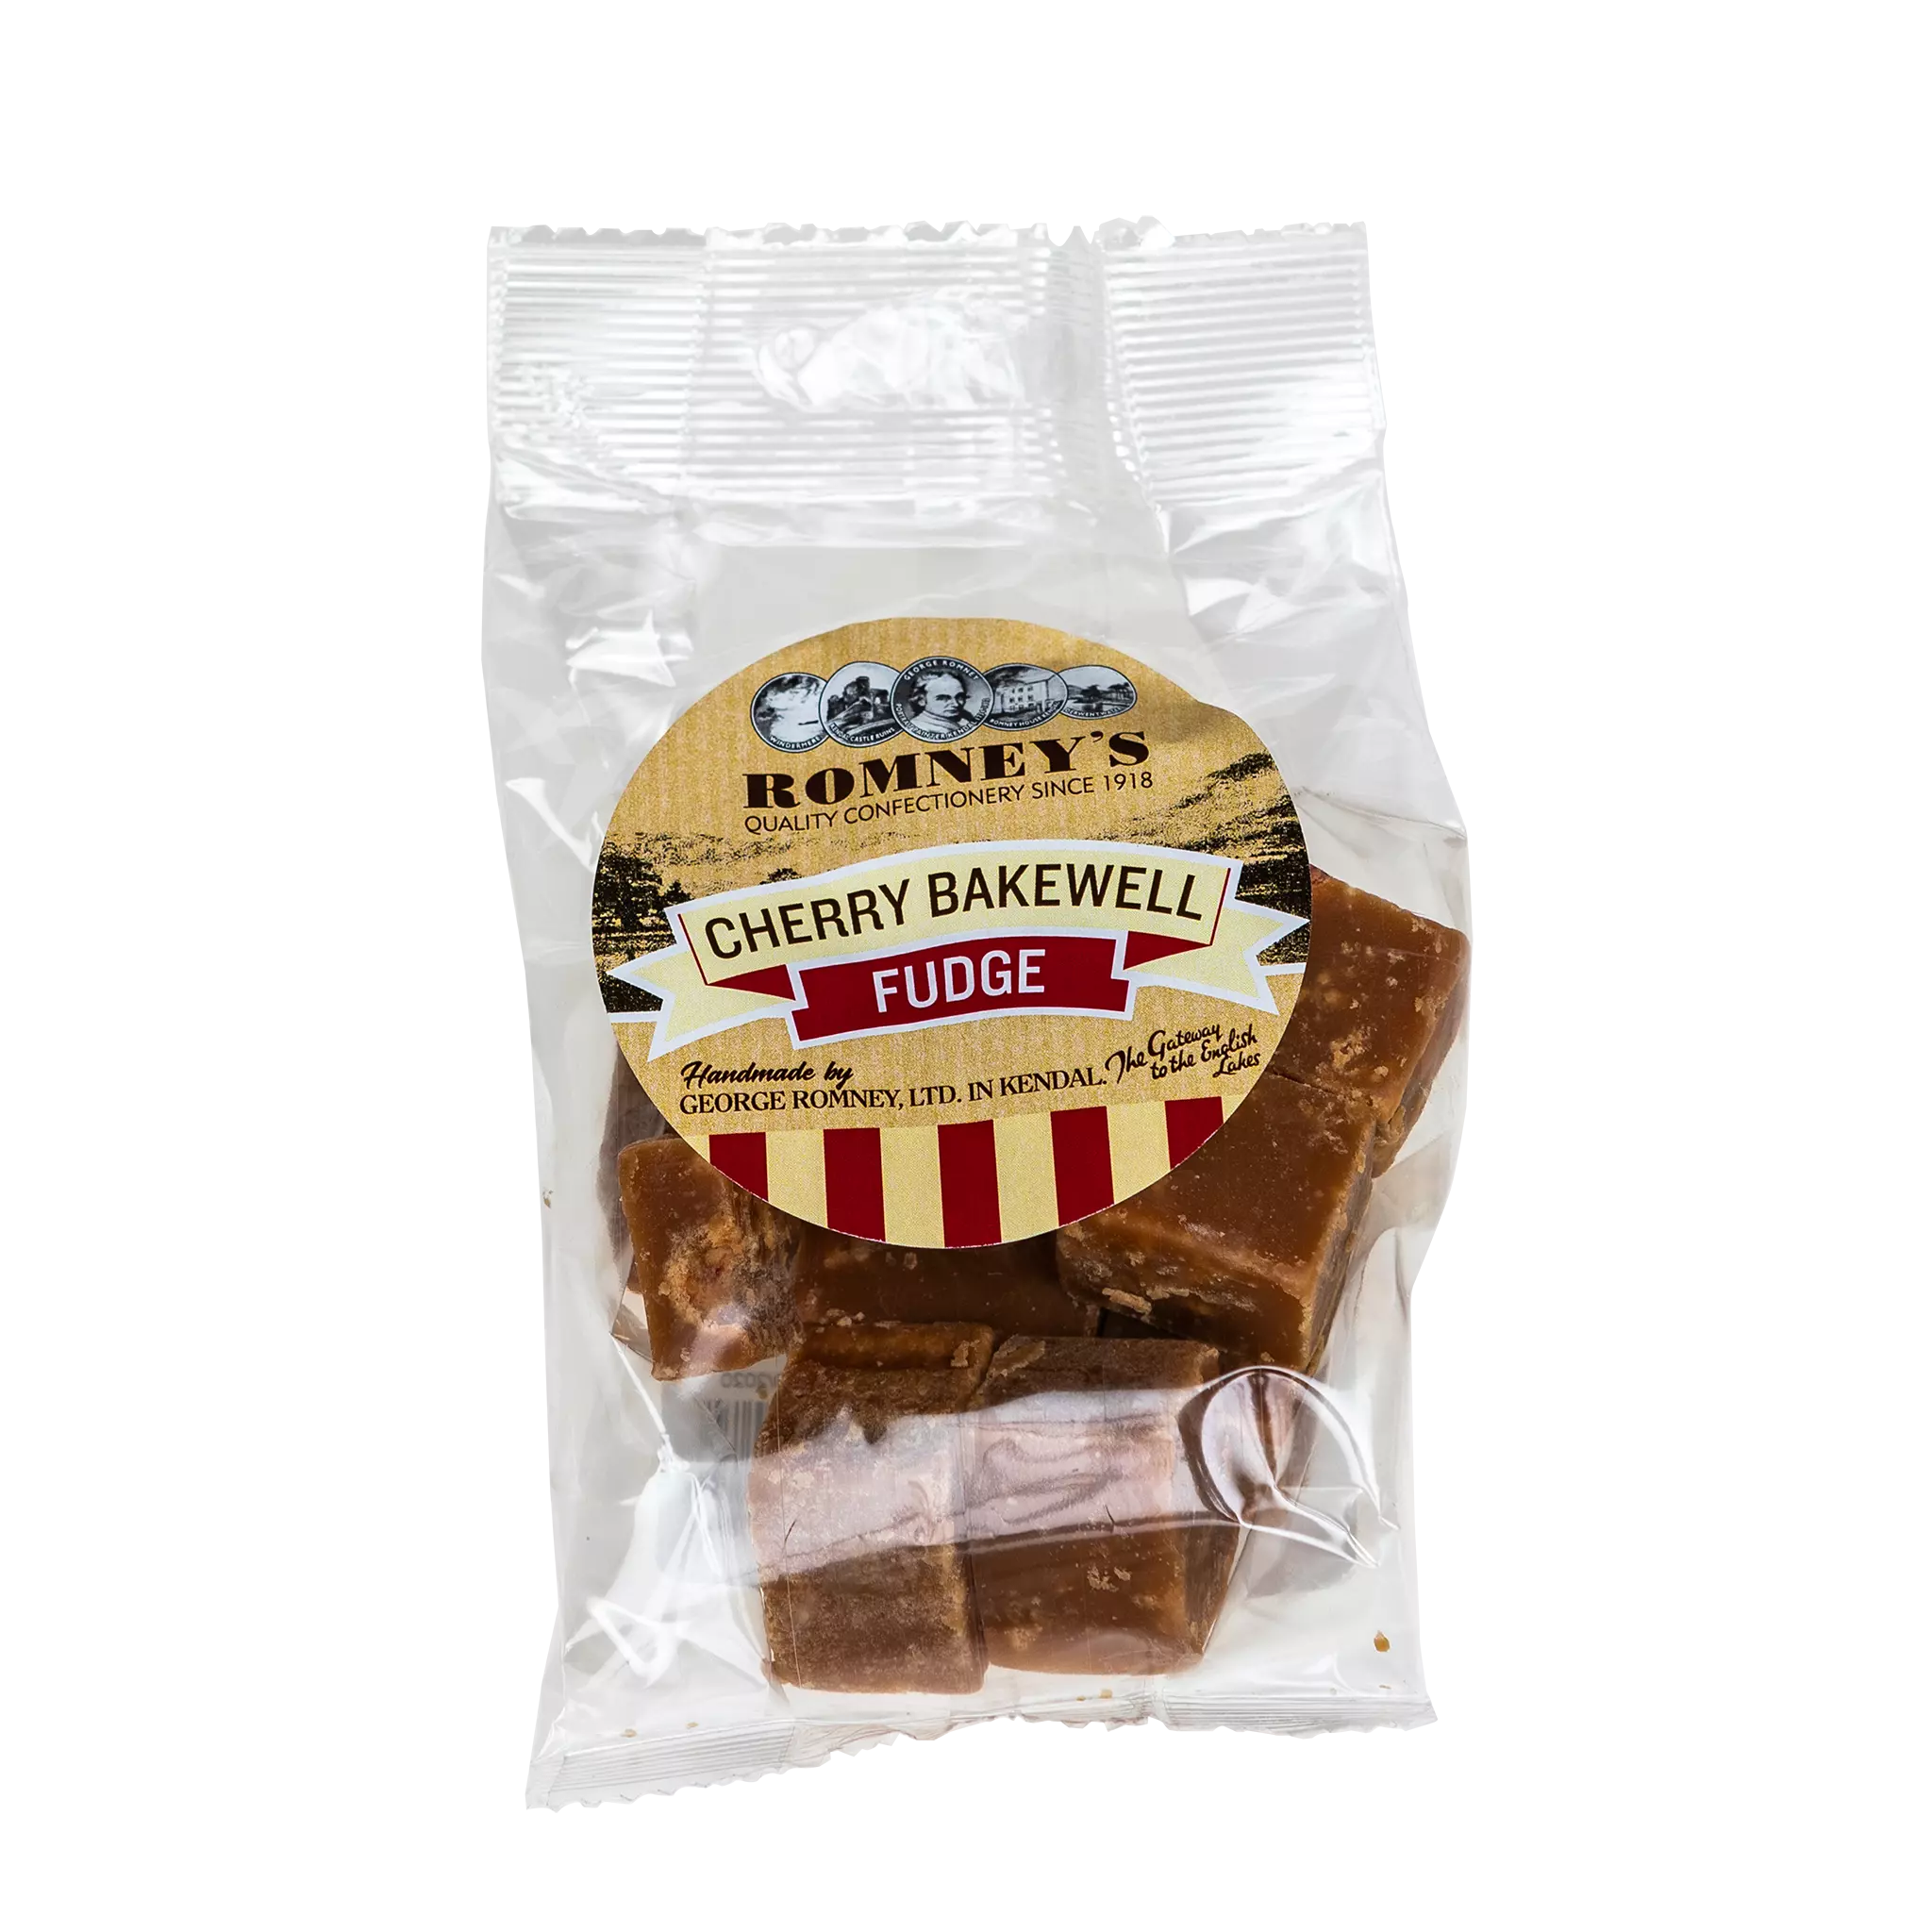 A transparent bag containing pieces of Fudge. The bag has a label on it that shows Romney's logo and says 'Cherry Bakewell Fudge'.